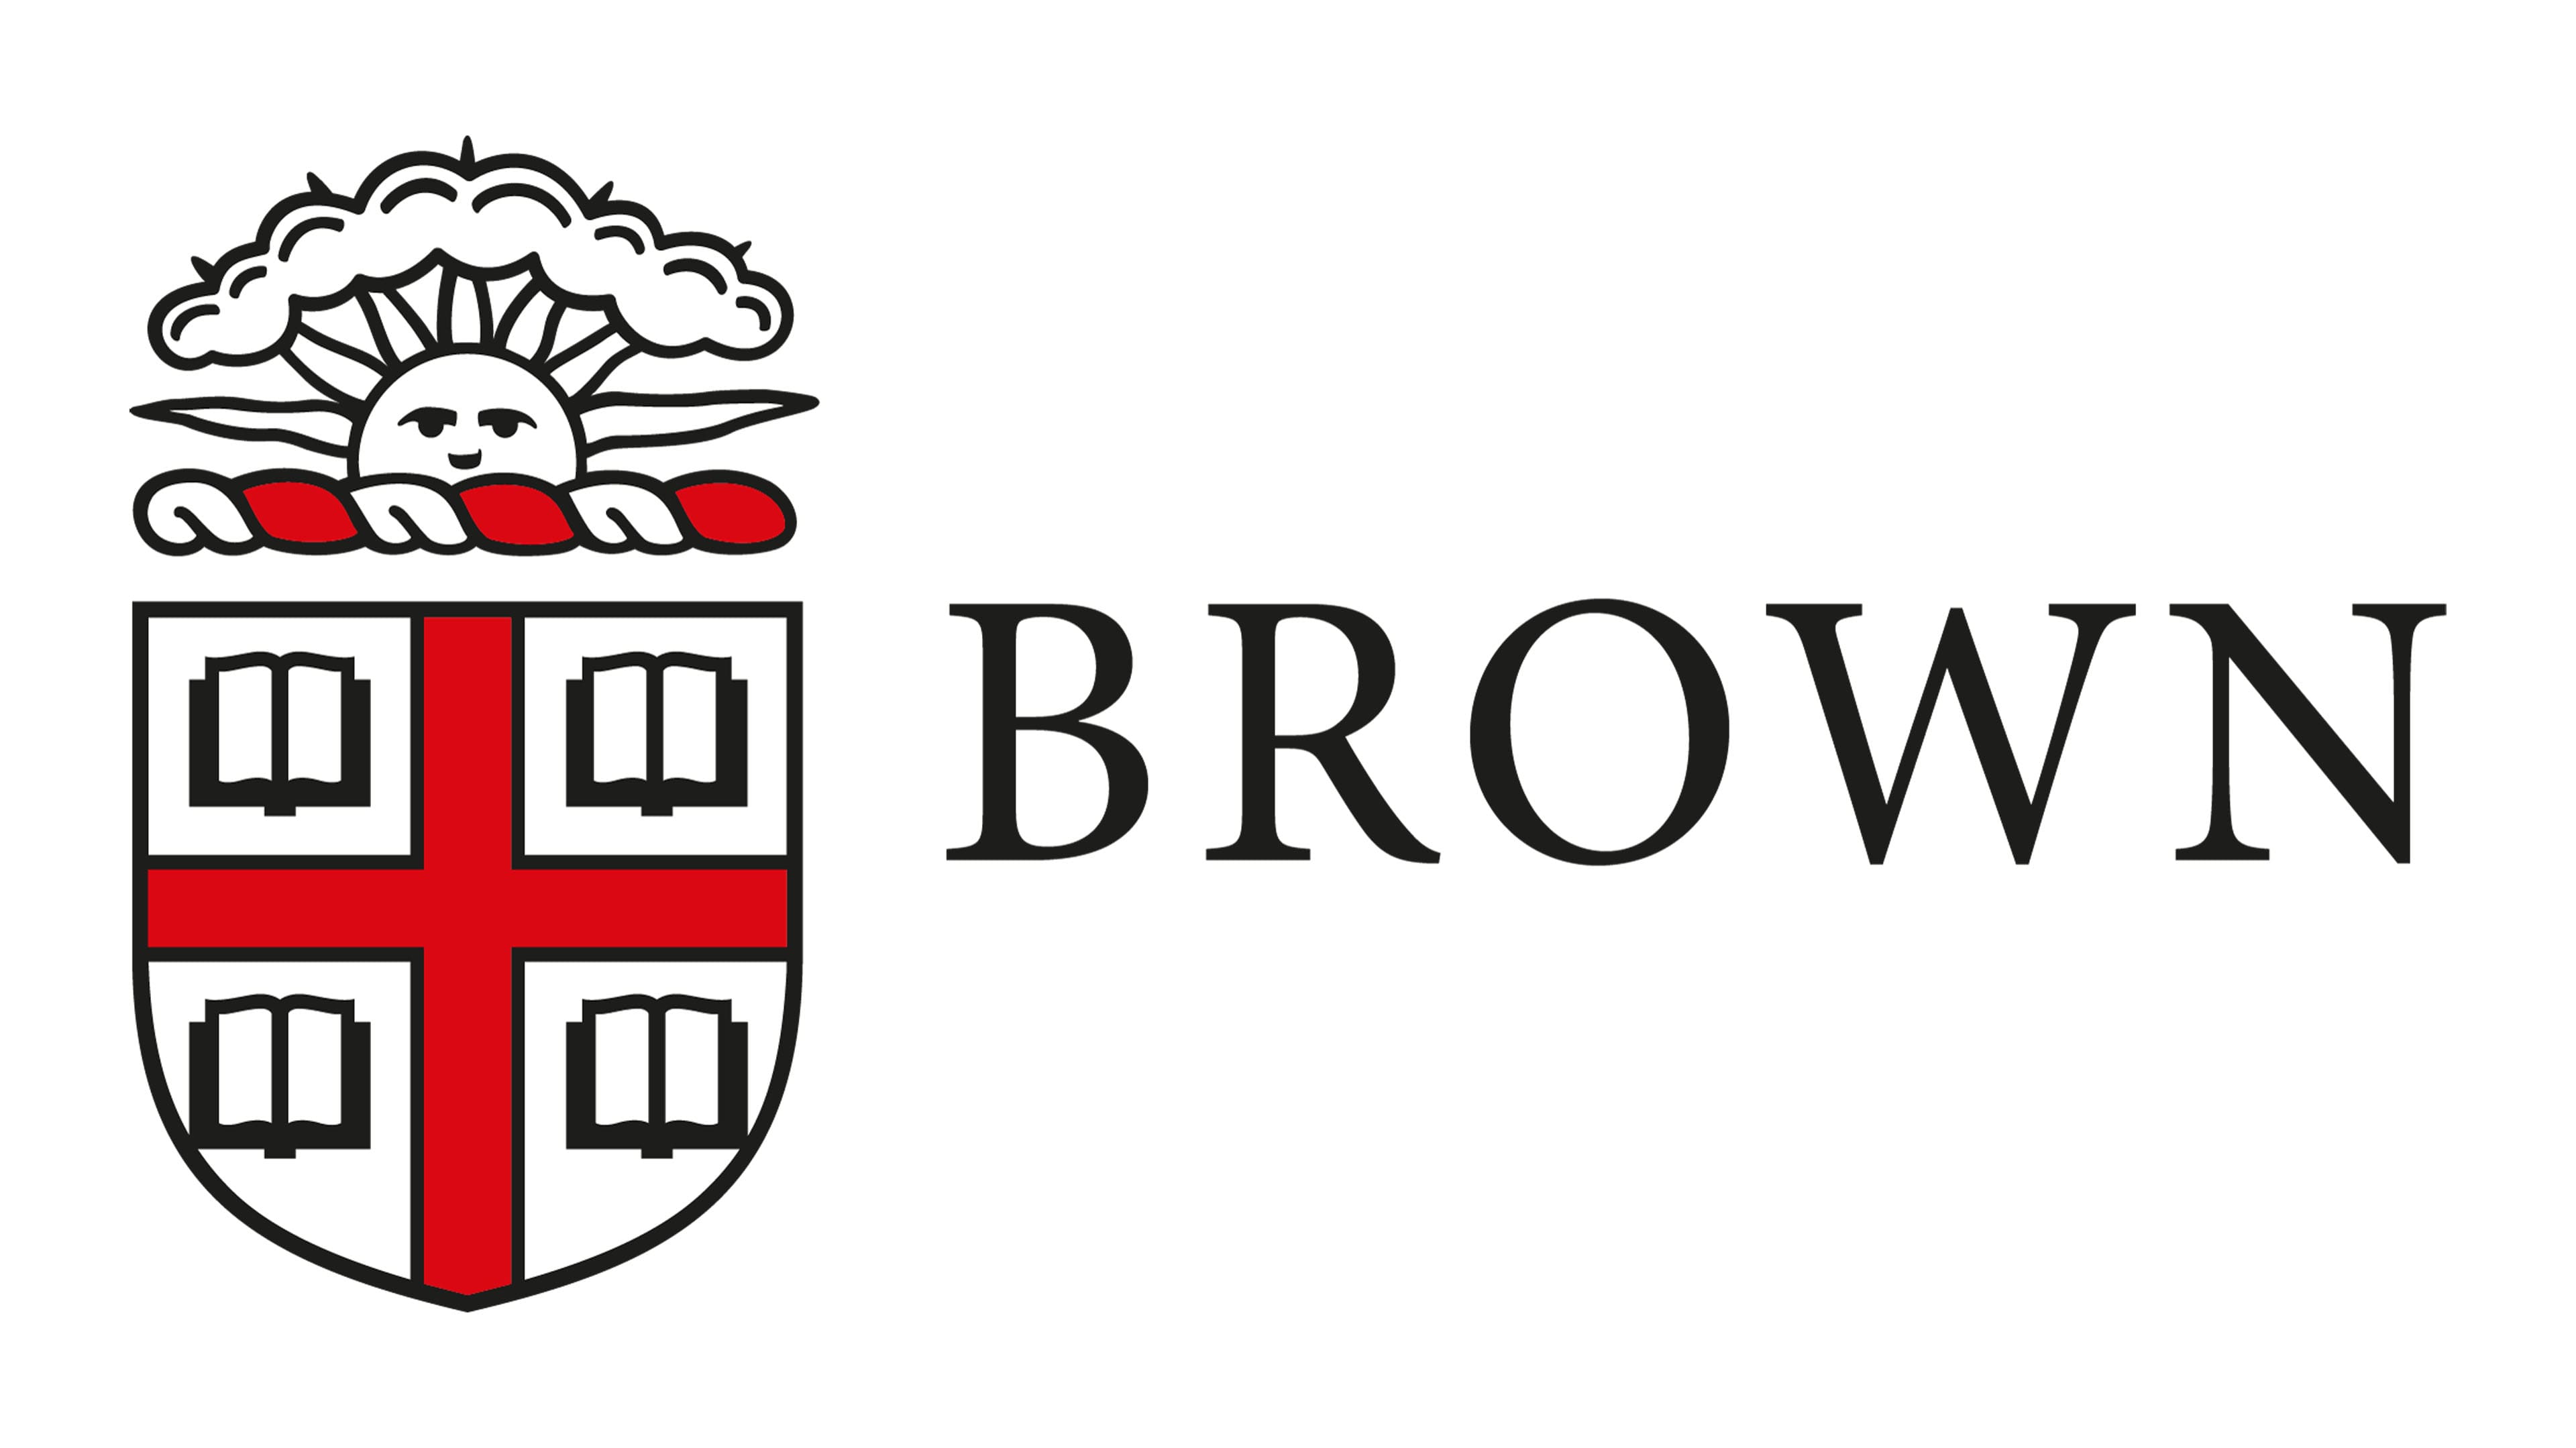 75 History Of Brown University free Download - MyWeb